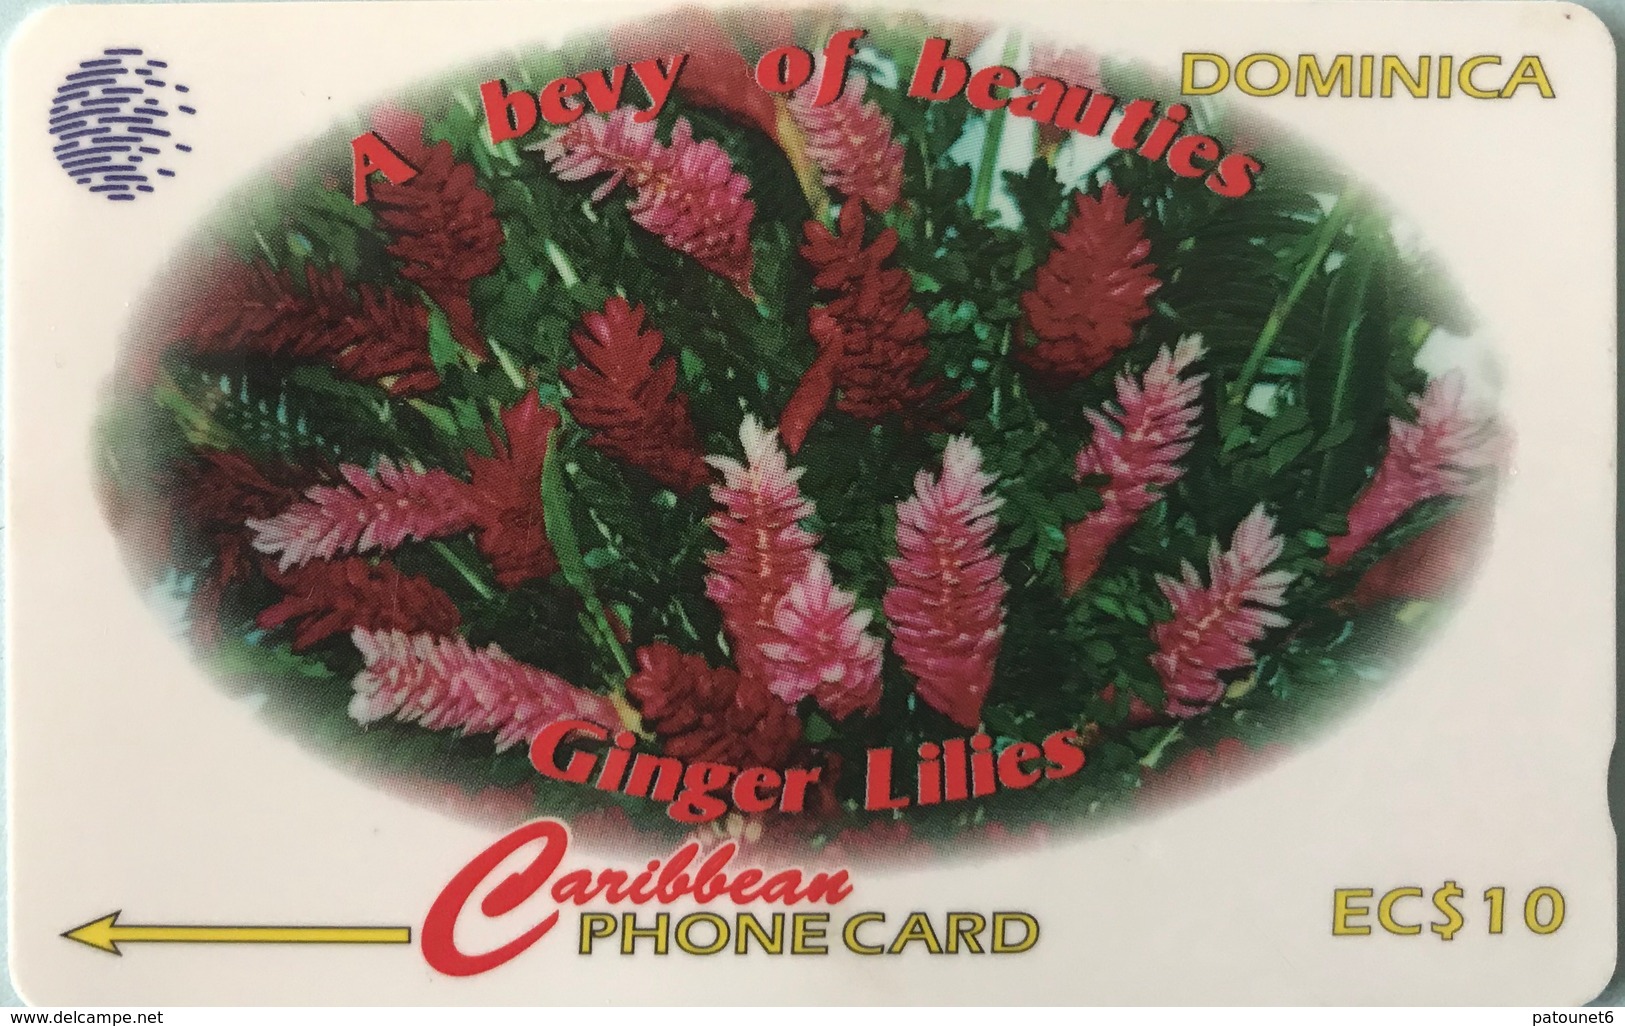 DOMINIQUE - Phonecard  - Cable § Wireless  - Ginger Lilies  -  EC $ 10 - Dominica